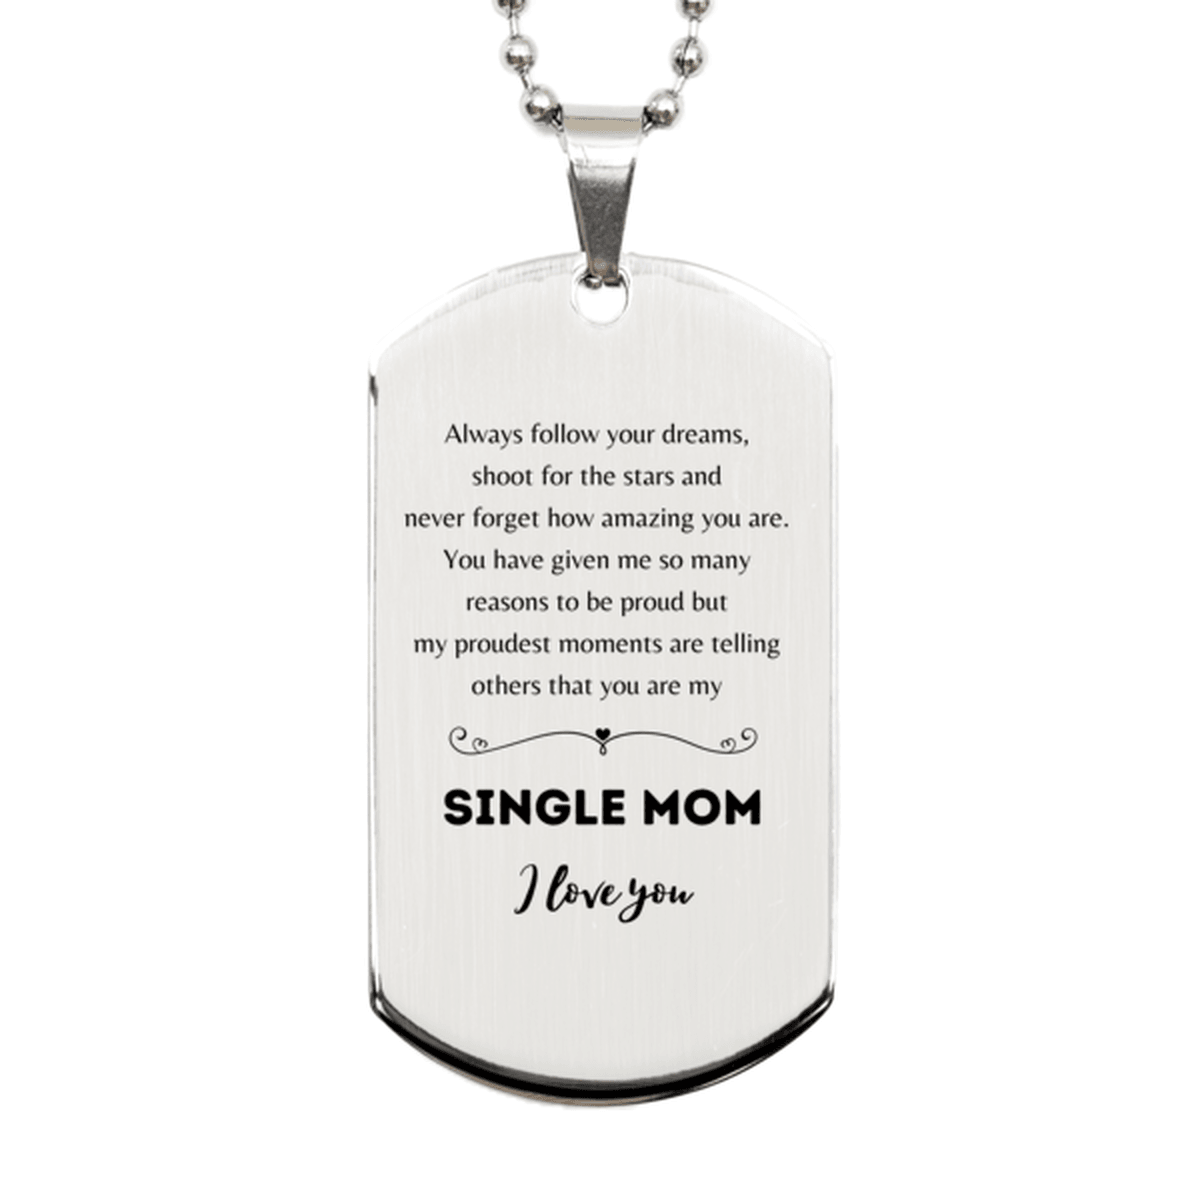 Single Mom Silver Dog Tag Engraved Necklace - Always Follow your Dreams - Birthday, Christmas Holiday Jewelry Gift - Mallard Moon Gift Shop